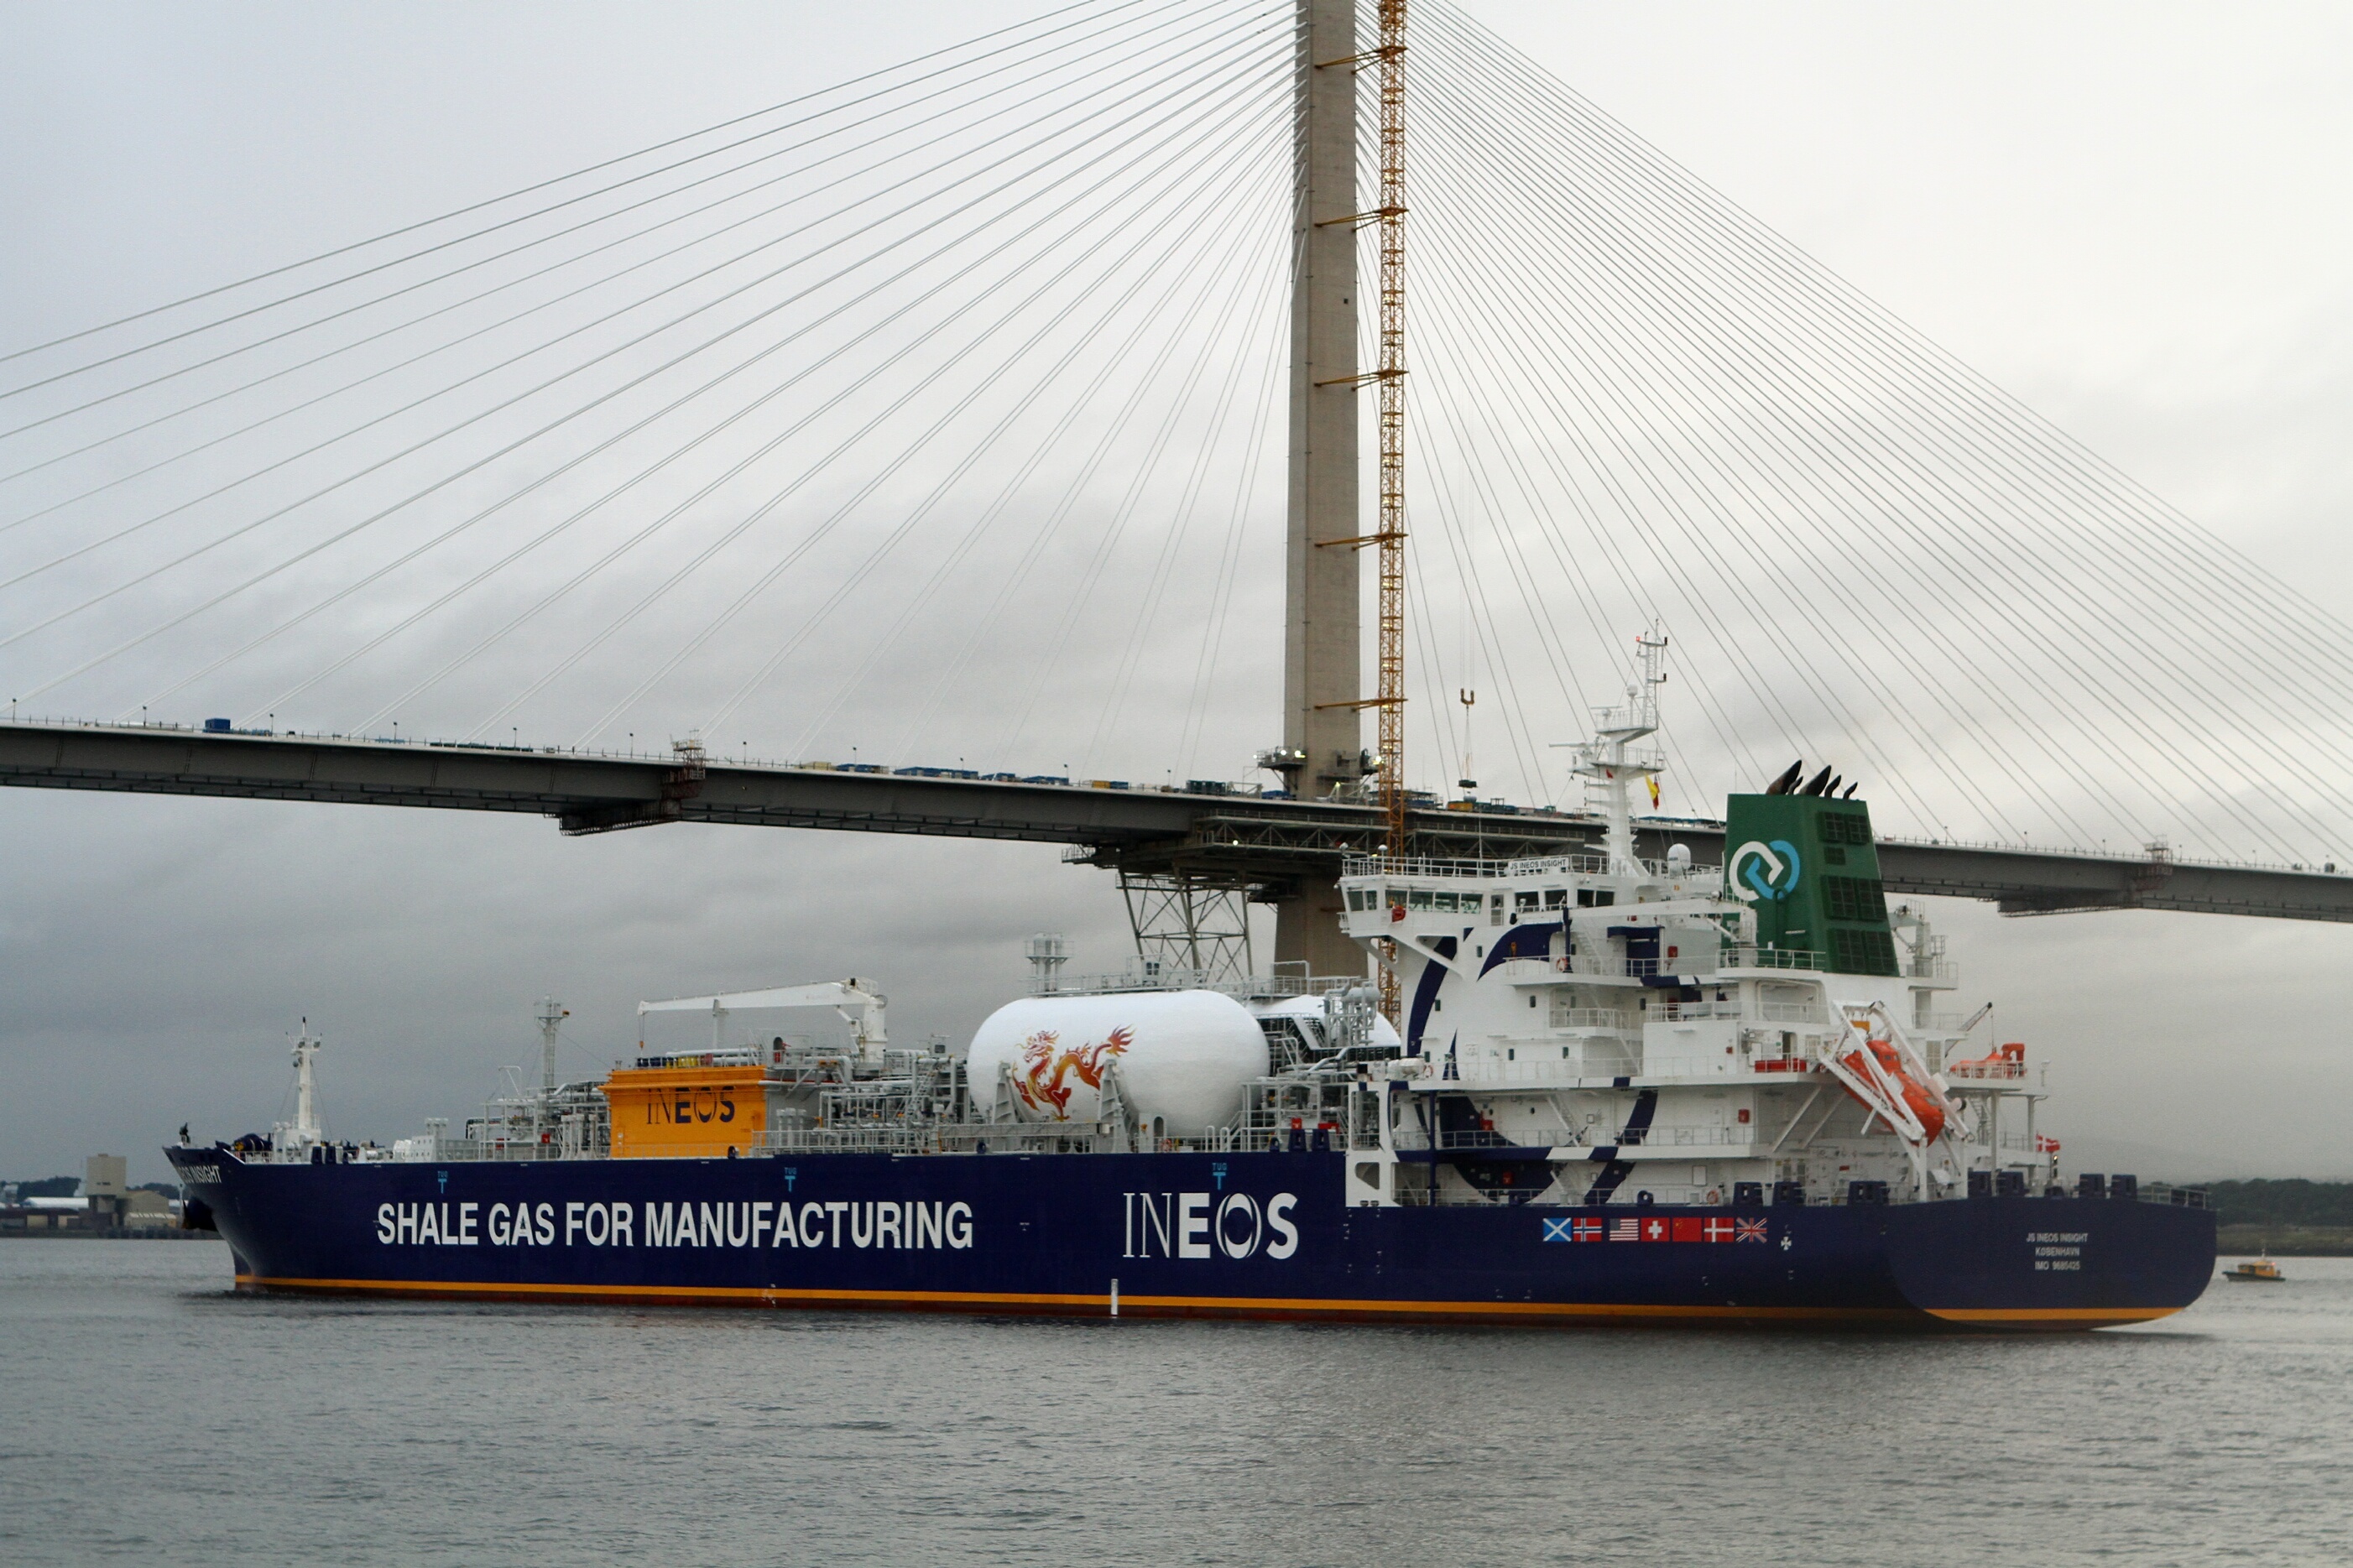 The first tanker of US shale gas arriving in the Forth